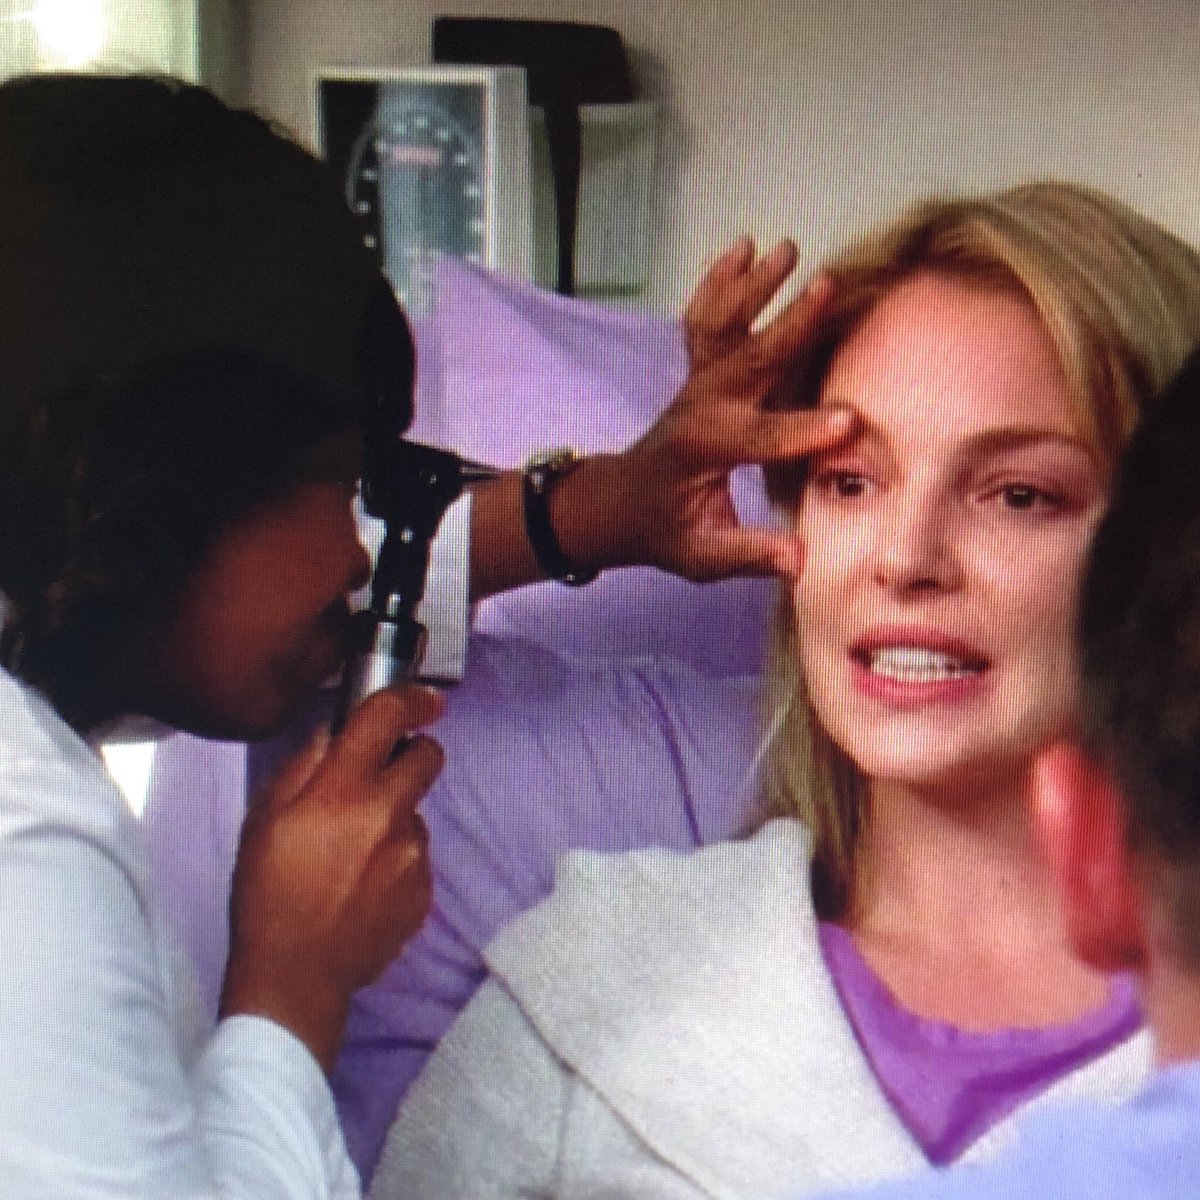 Okay this physical exam on Grey’s Anatomy made me chuckle: otoscope being used for ophthalmologic exam